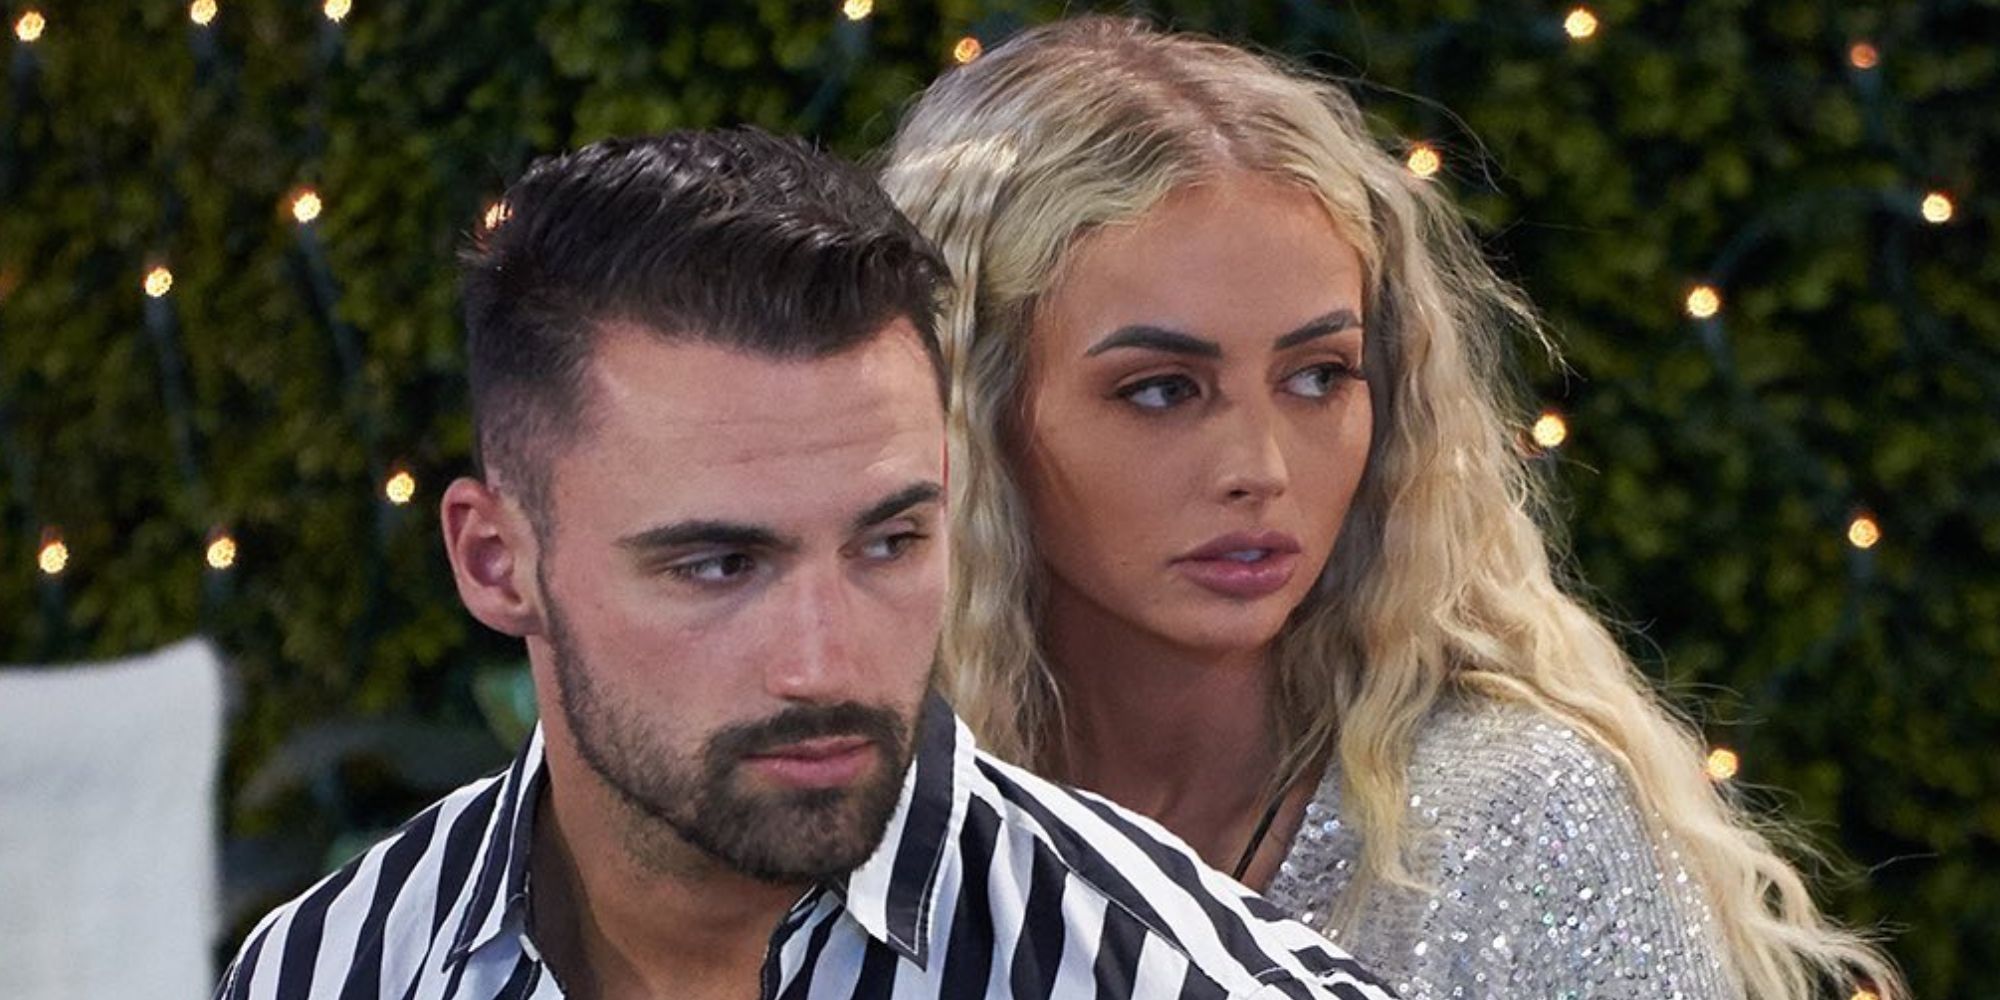 Are Mackenzie And Connor Still Together? Love Island 2 Update